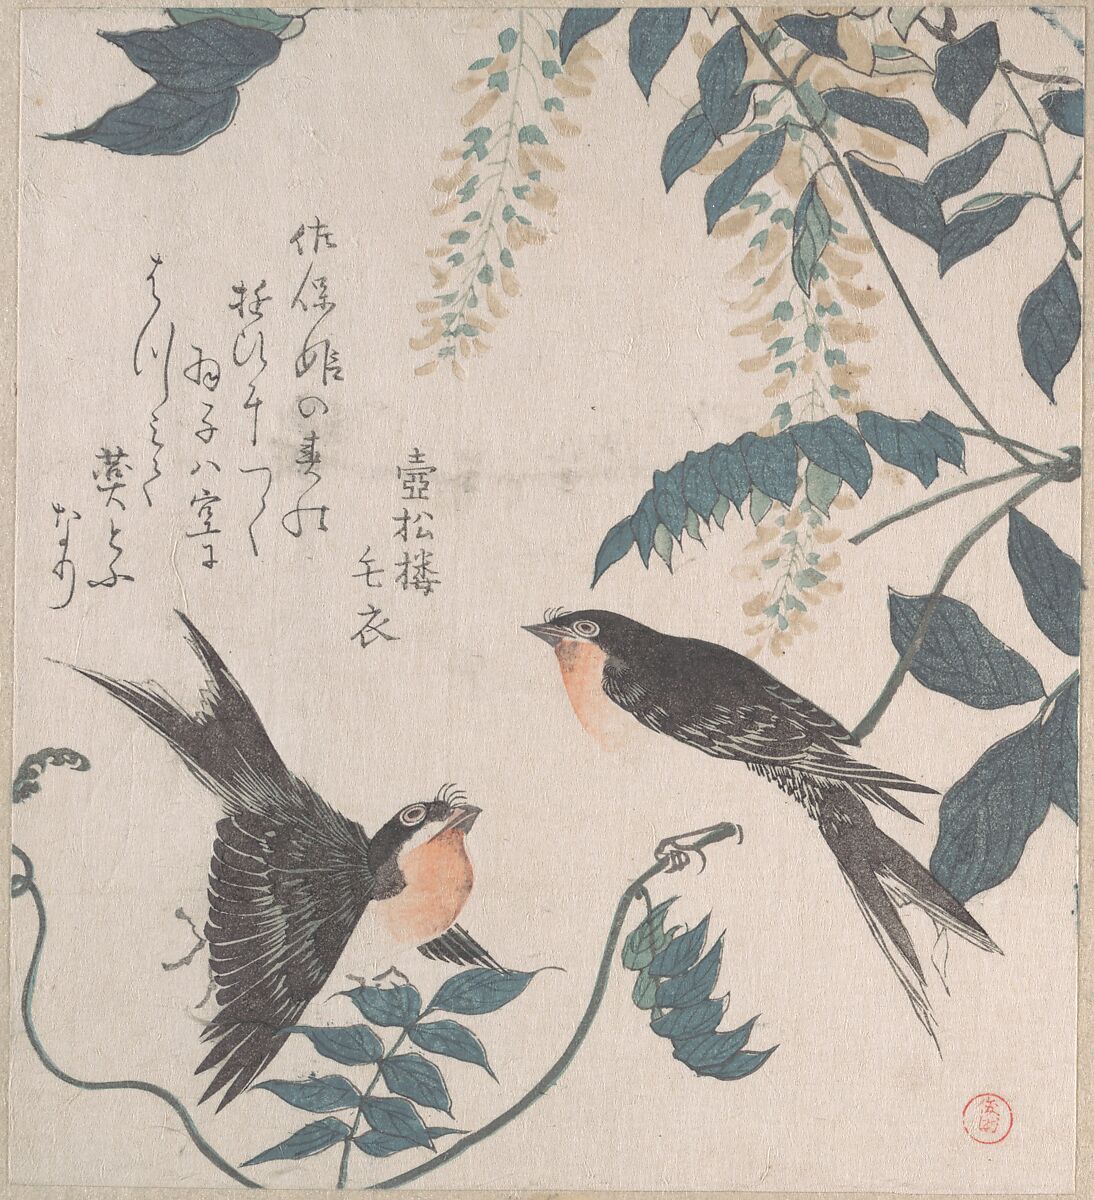 Swallows and Wisteria, Kubo Shunman (Japanese, 1757–1820) (?), Part of an album of woodblock prints (surimono); ink and color on paper, Japan 